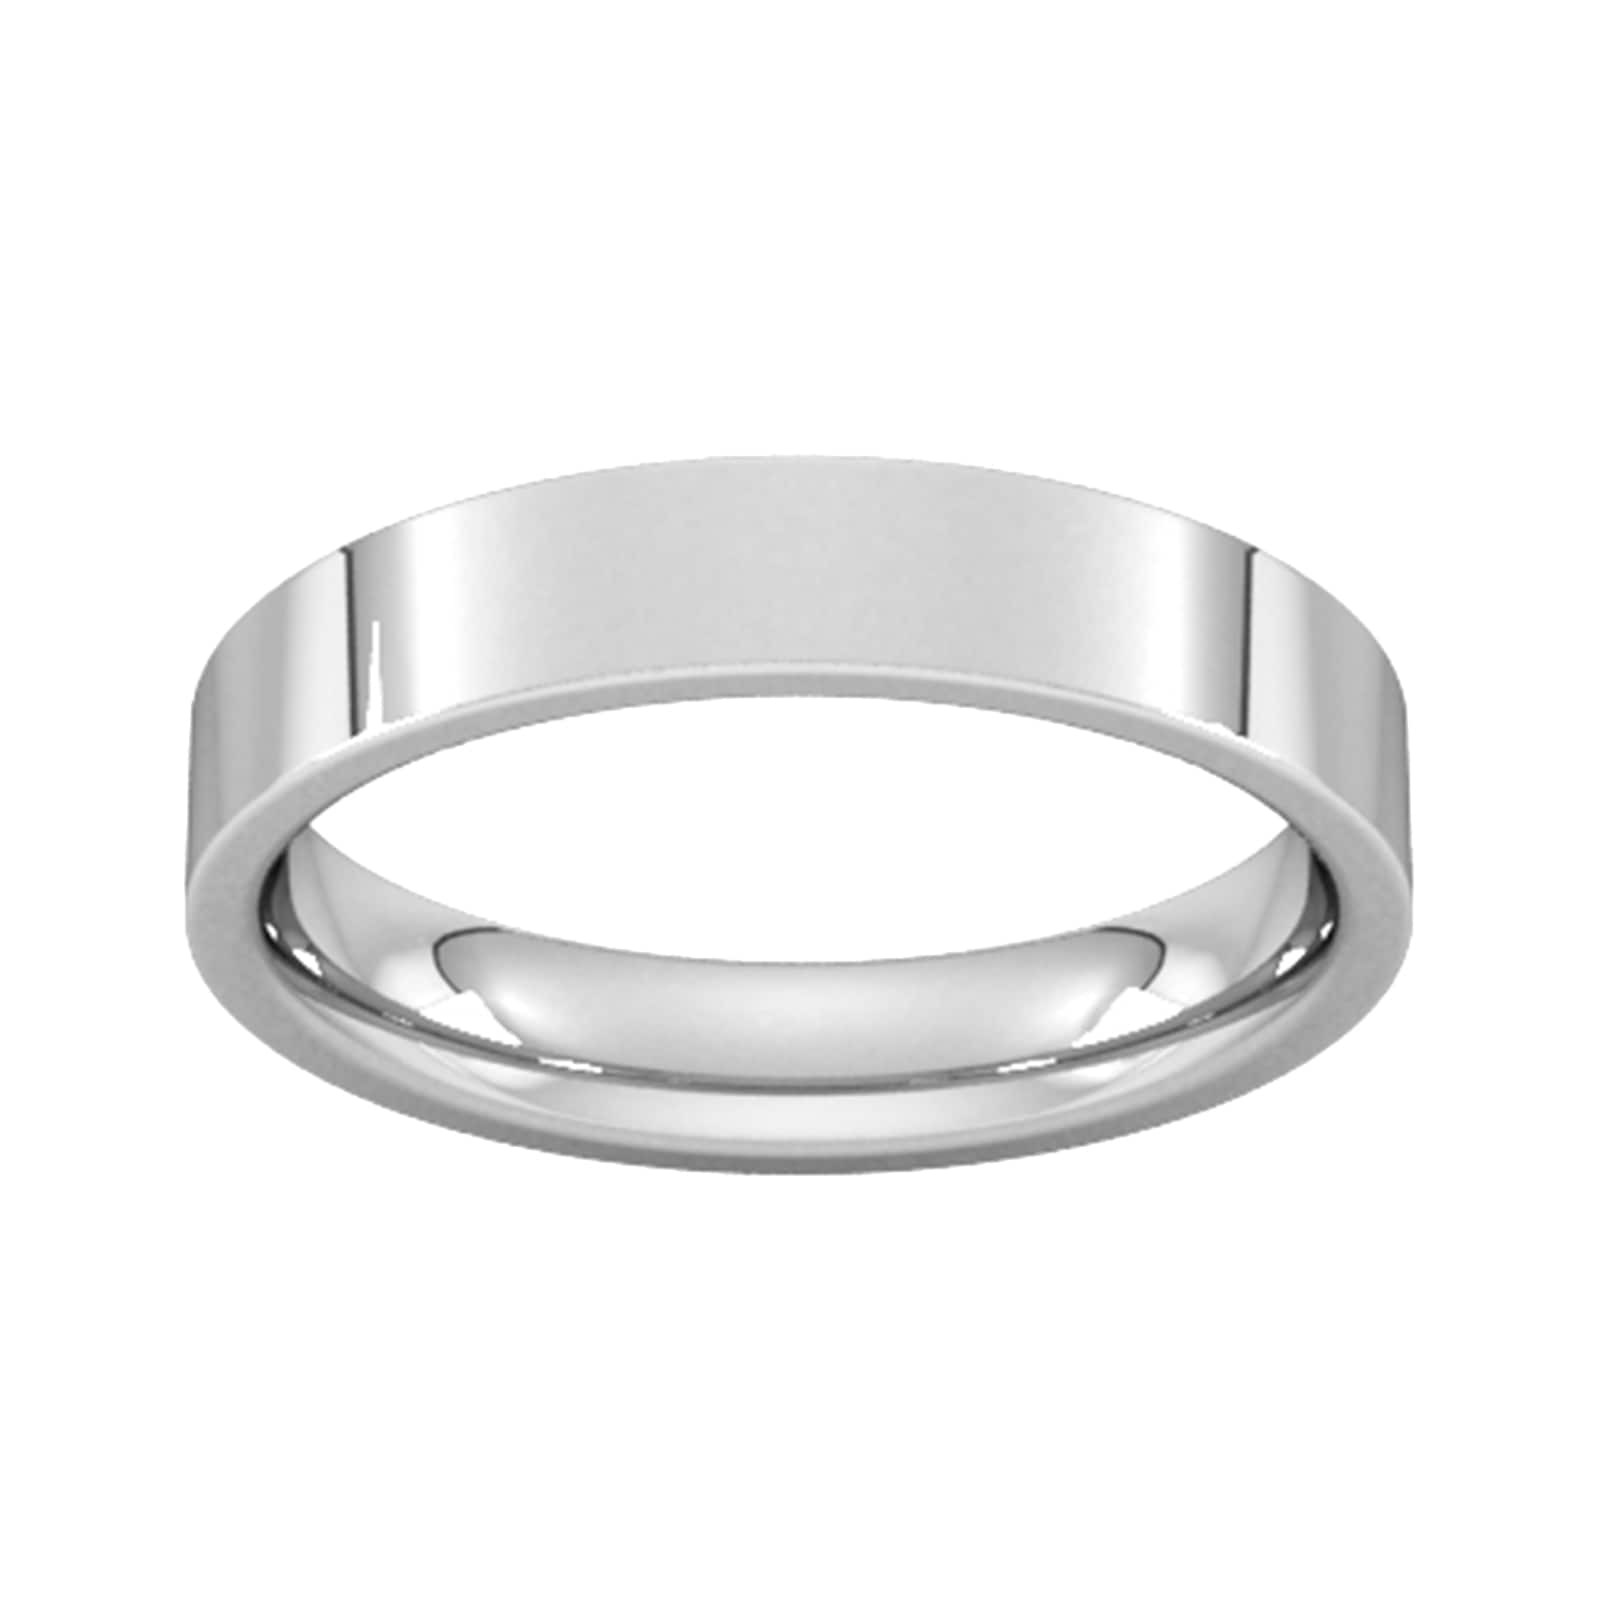 4mm Flat Court Heavy Wedding Ring In 18 Carat White Gold - Ring Size Q